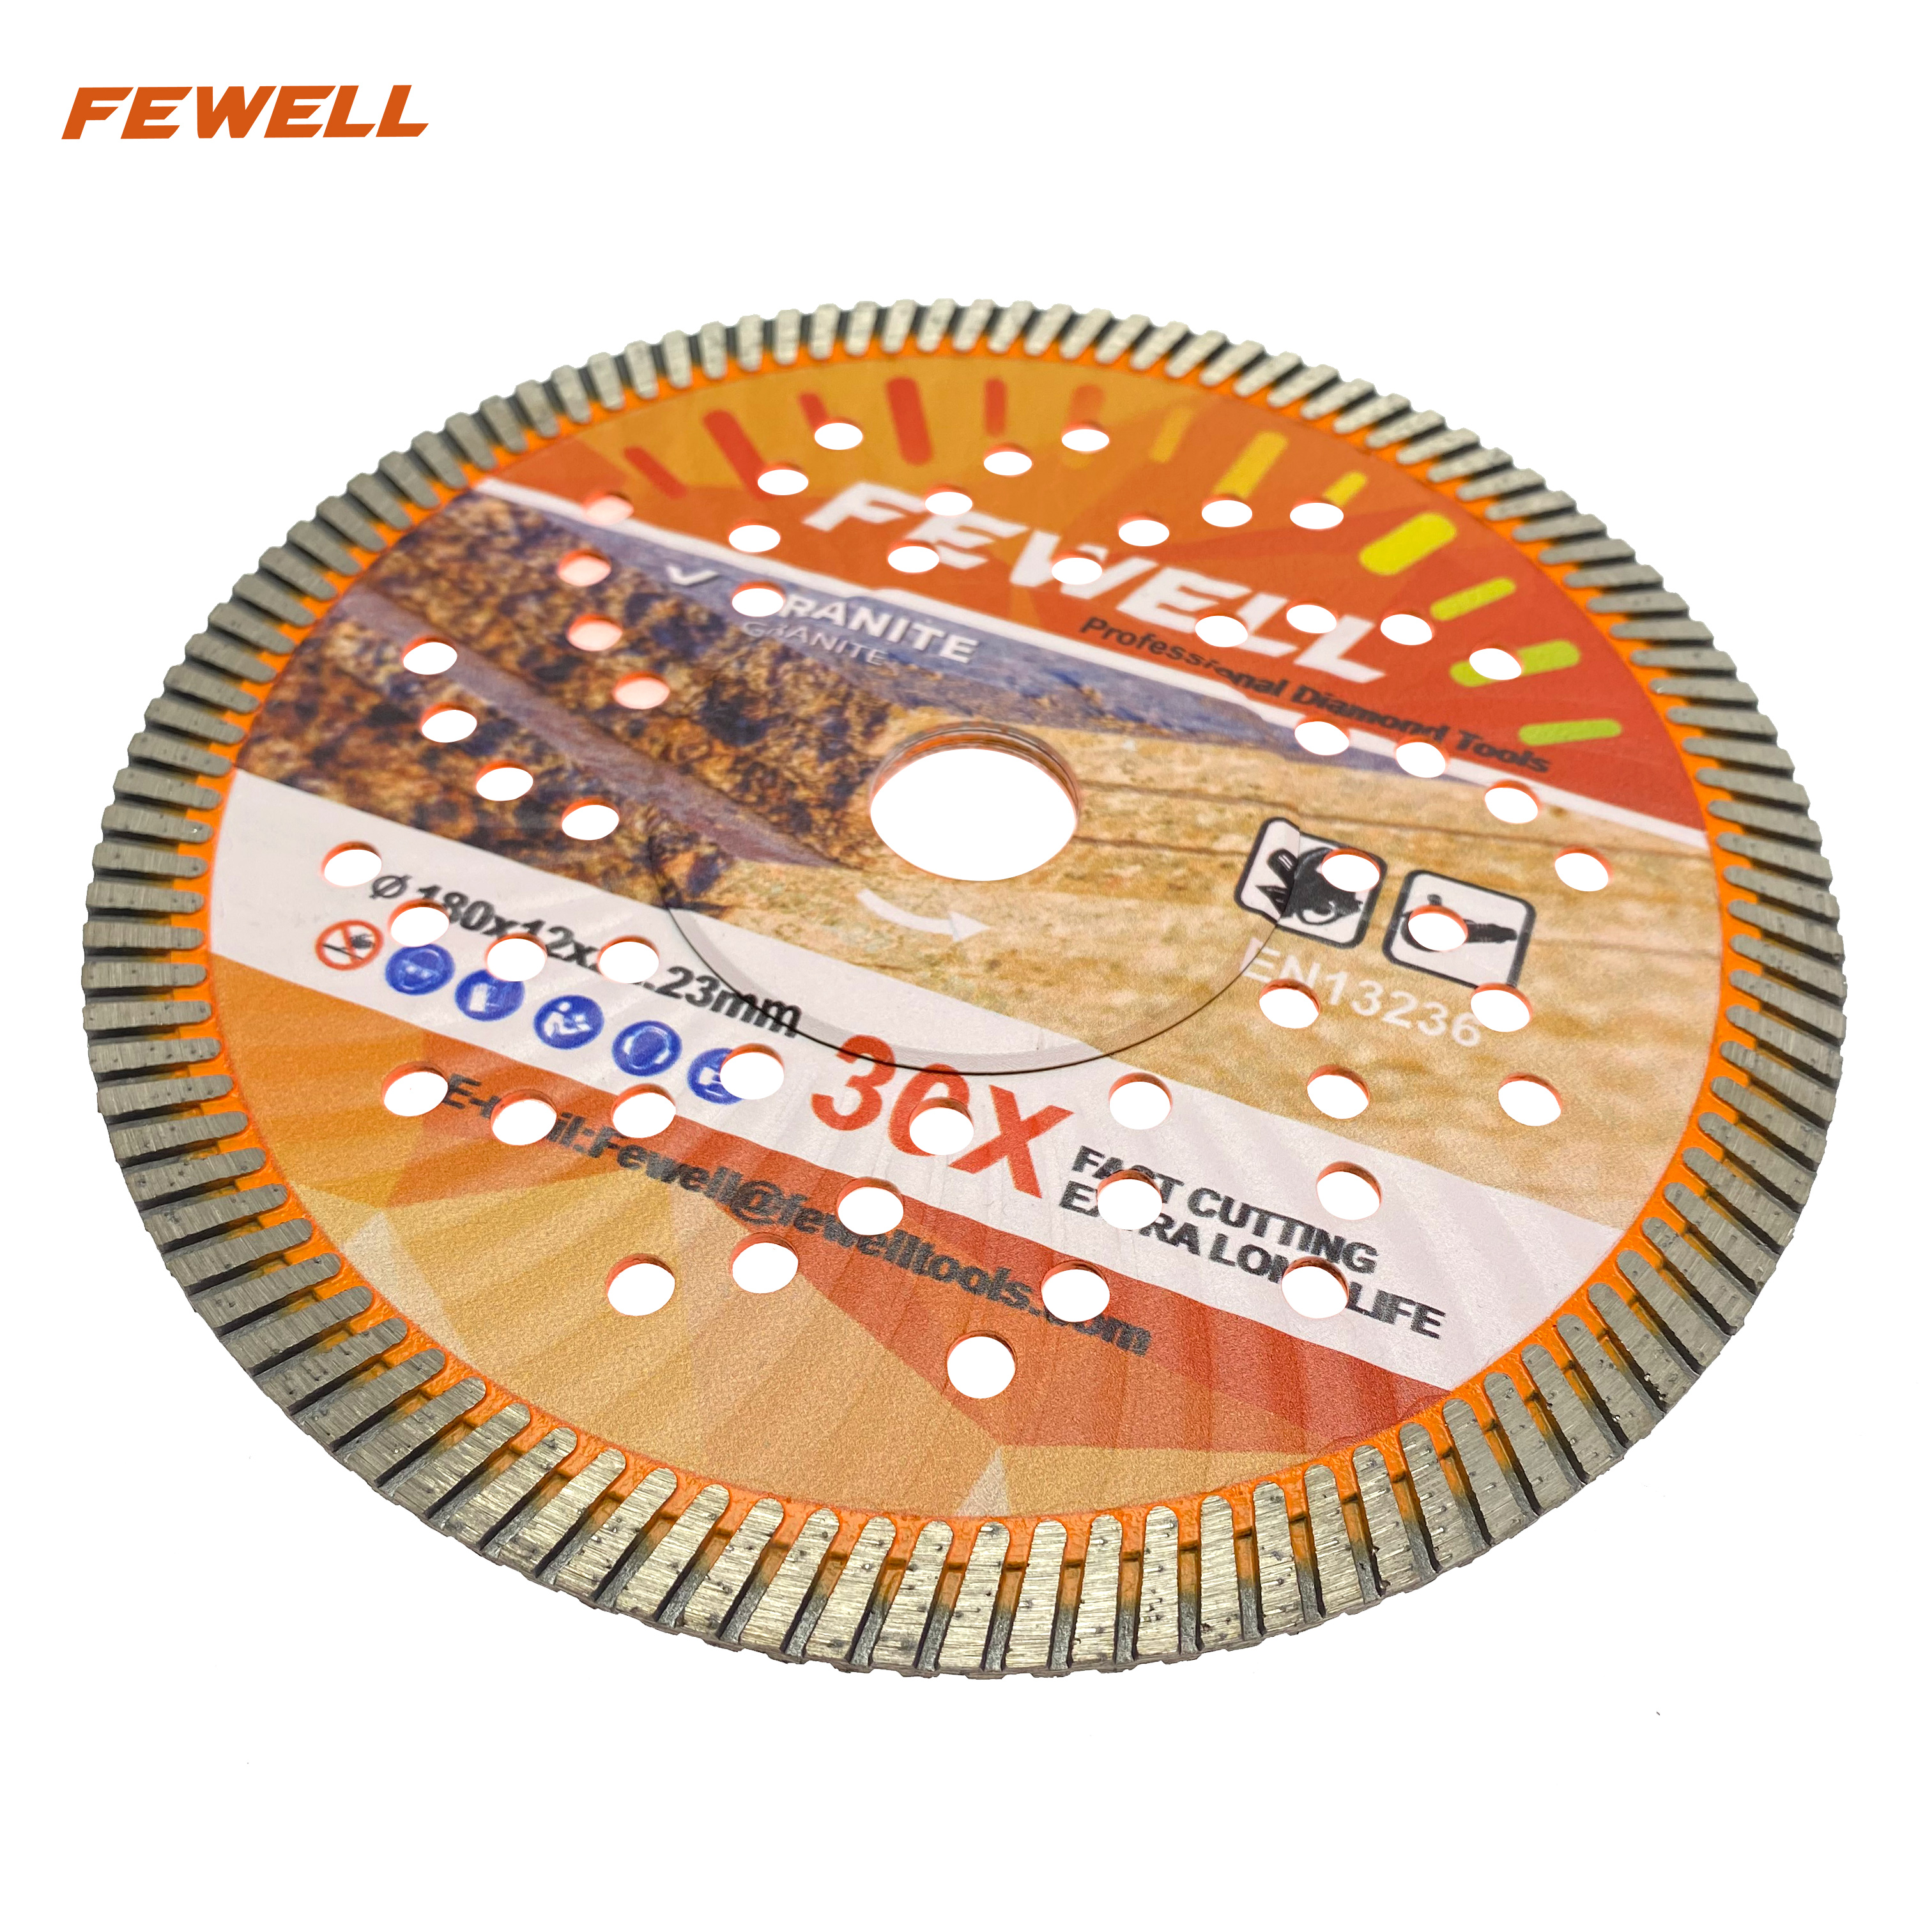 High quality 7inch 180*3.0*12*22.23mm Hot Press diamond turb wave saw blade with Reinforced Center for cutting granite 